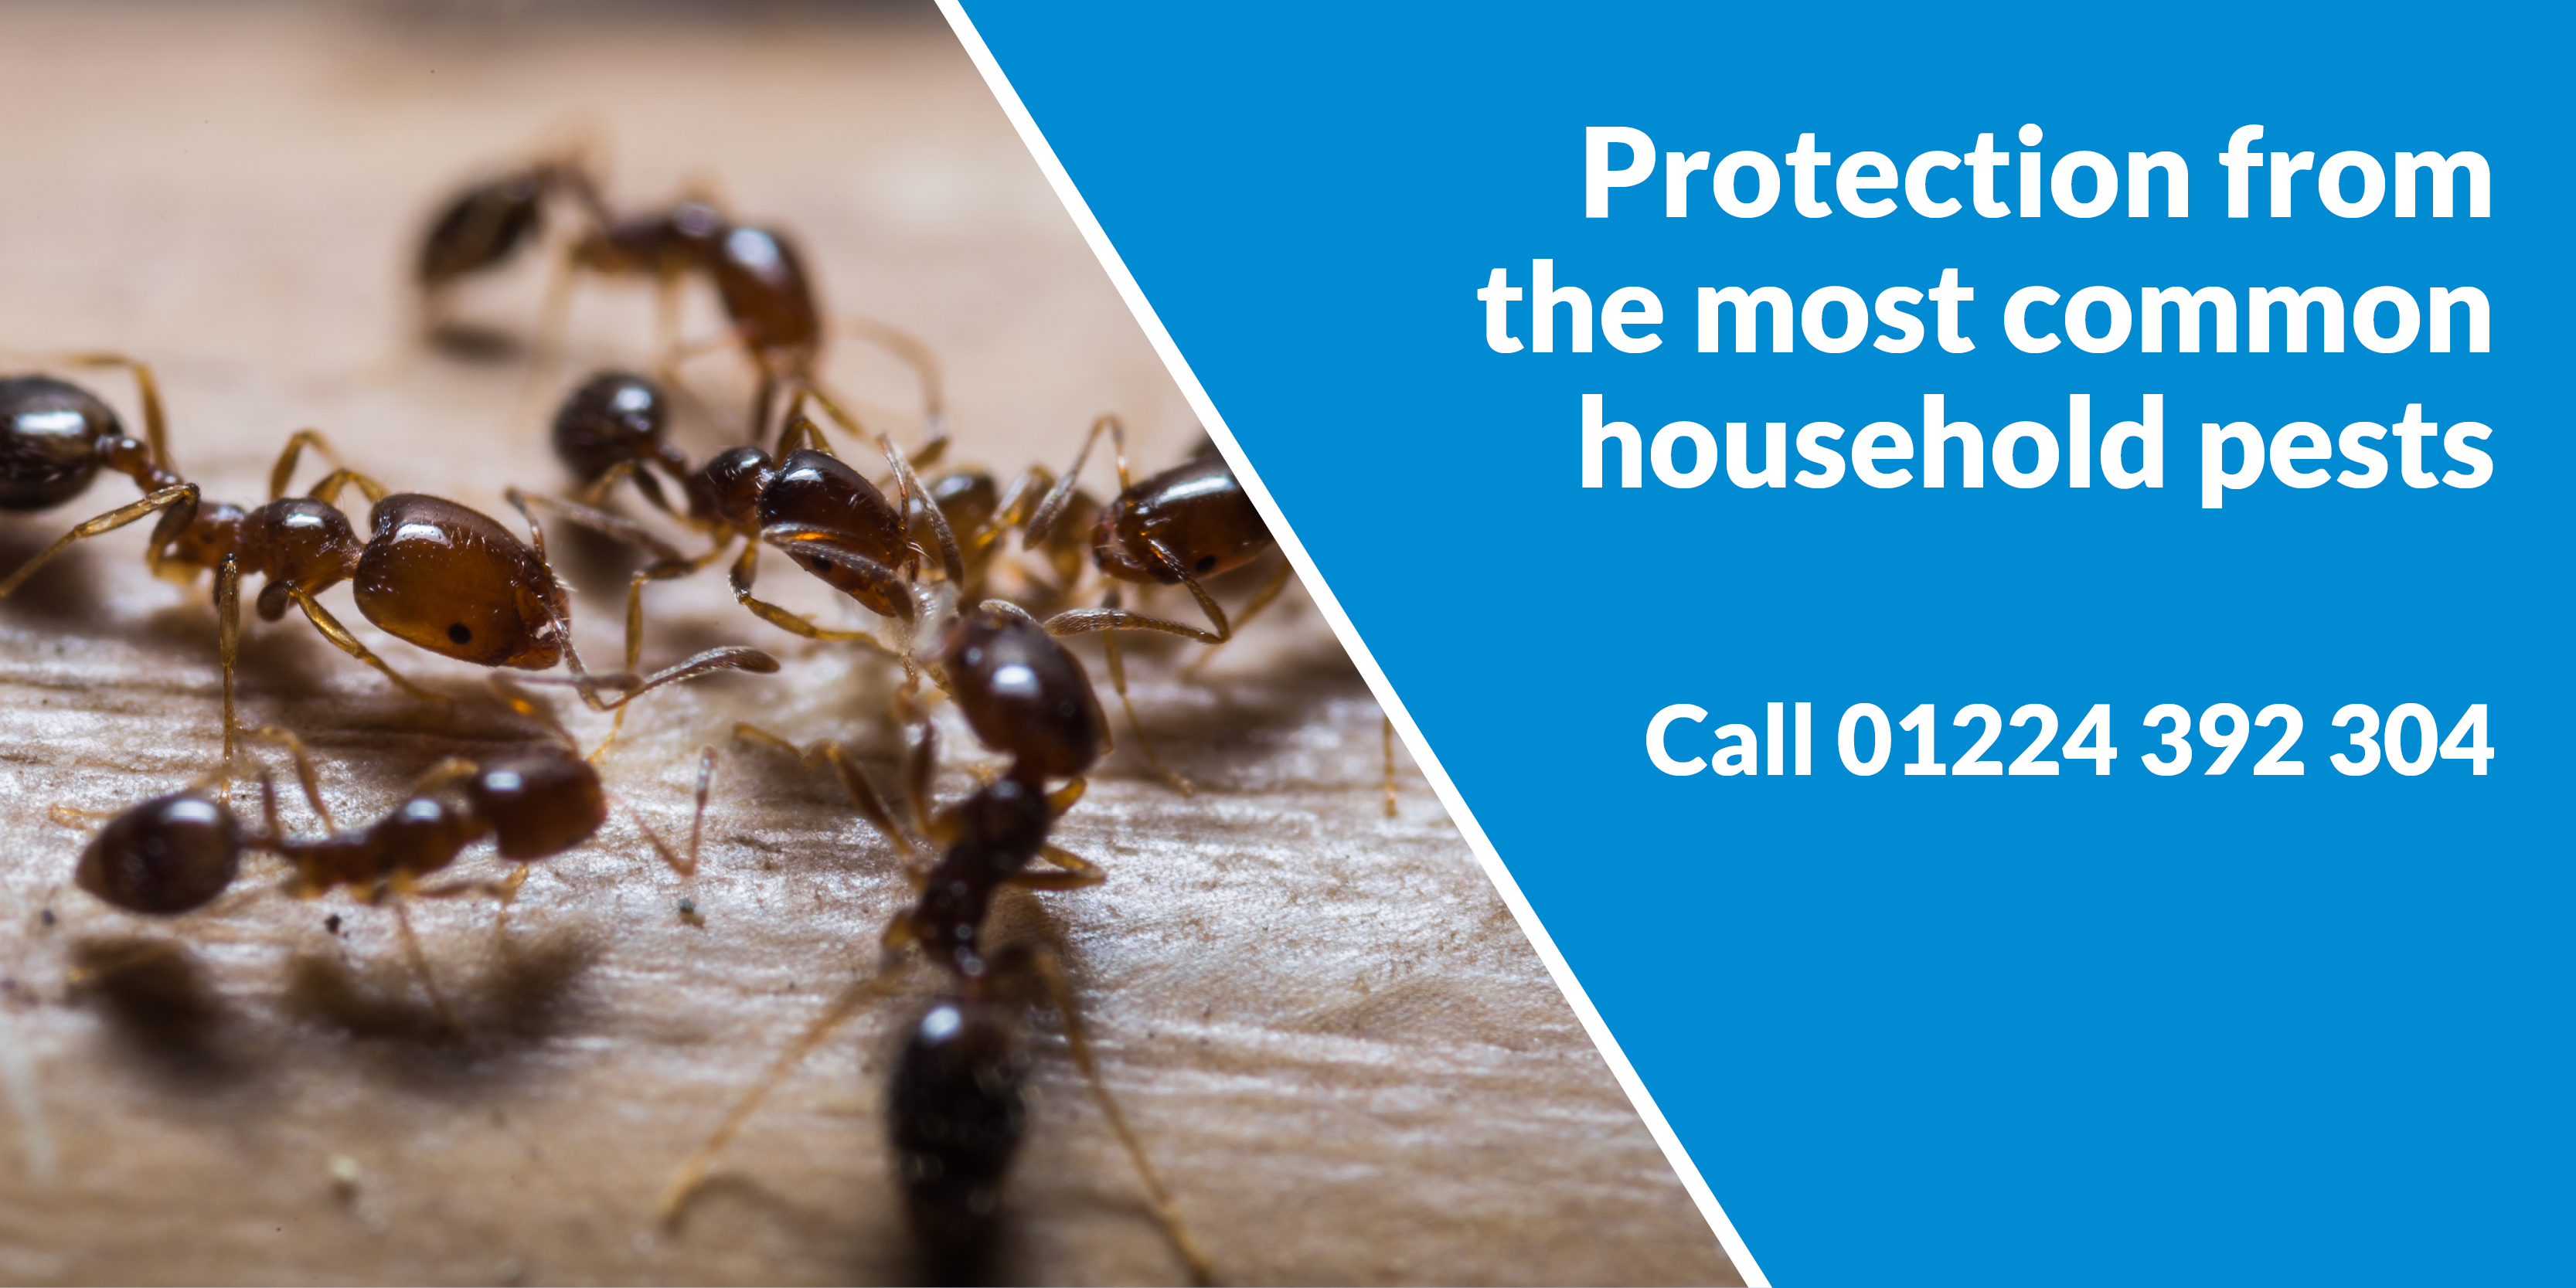 Pest Control Company Aberdeen Pest Solutions - Pest Solutions